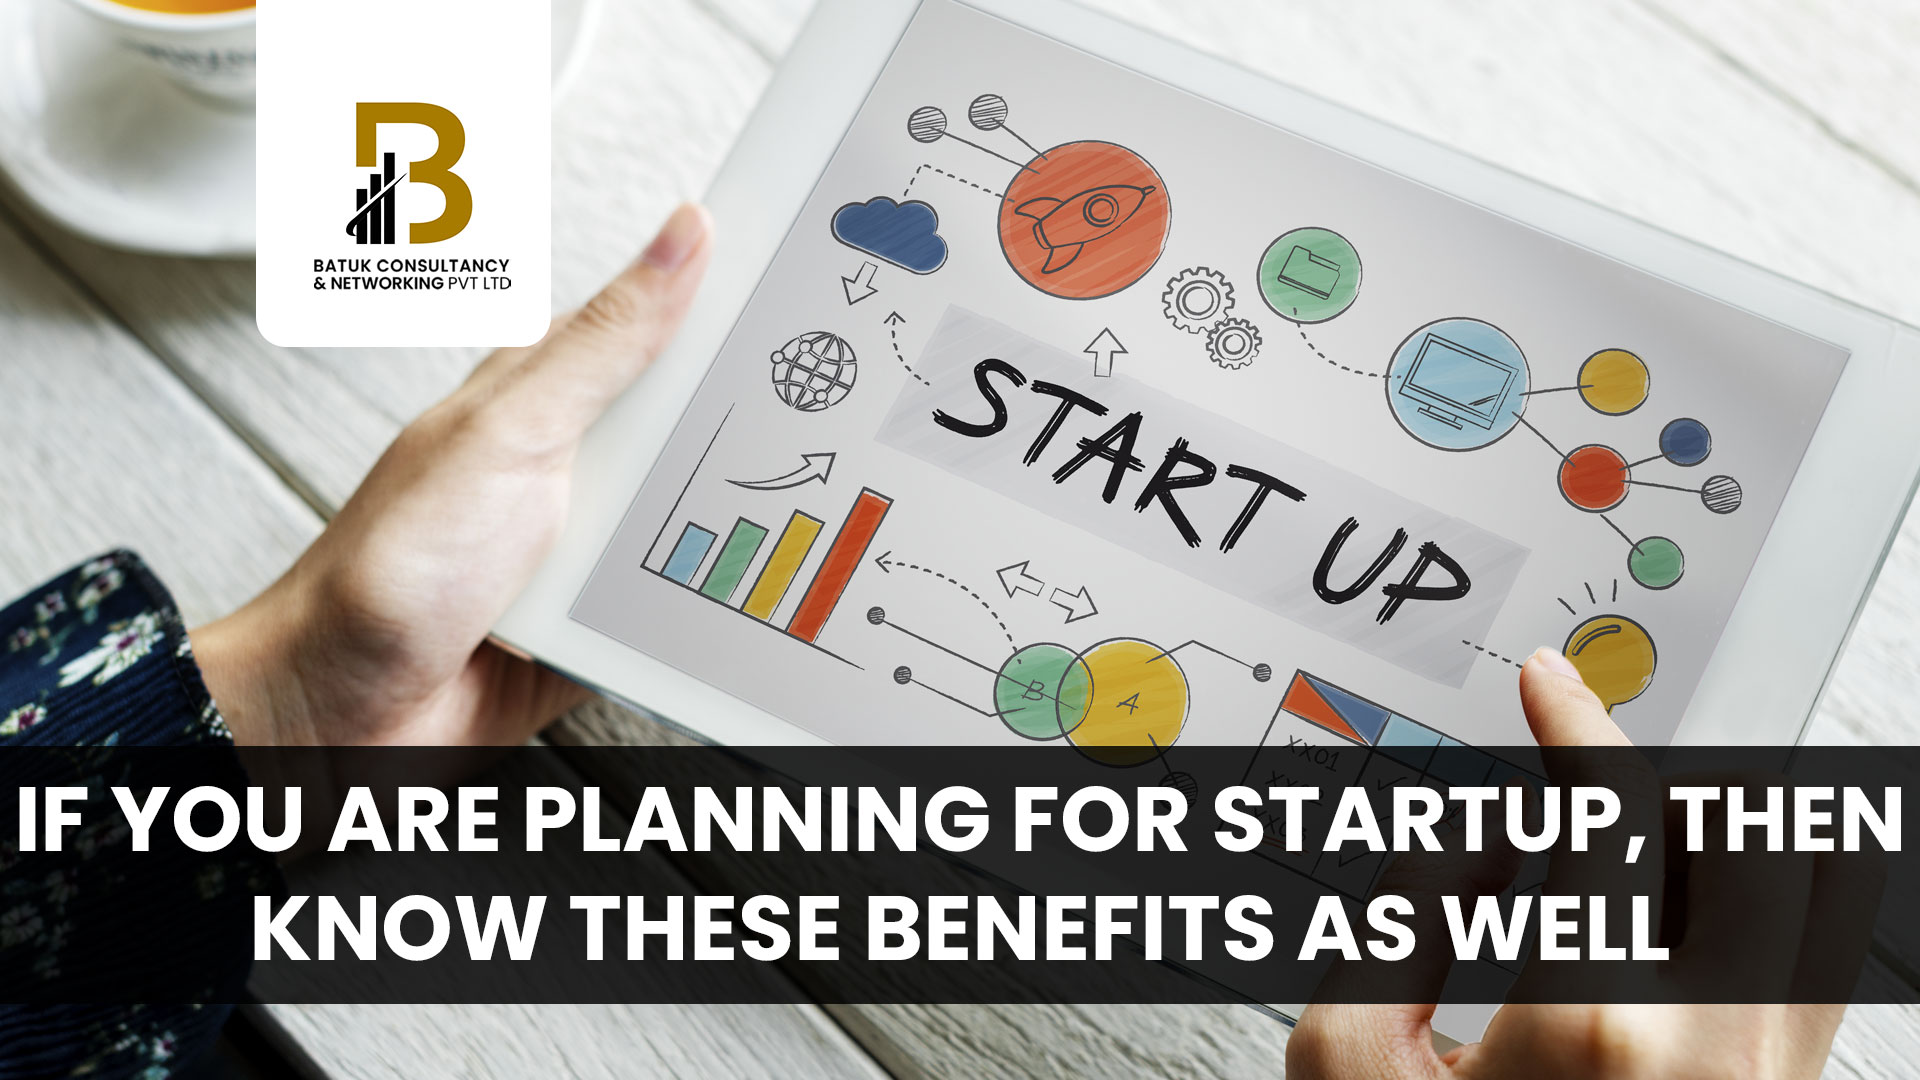 If you are planning for Startup, then know these benefits as well